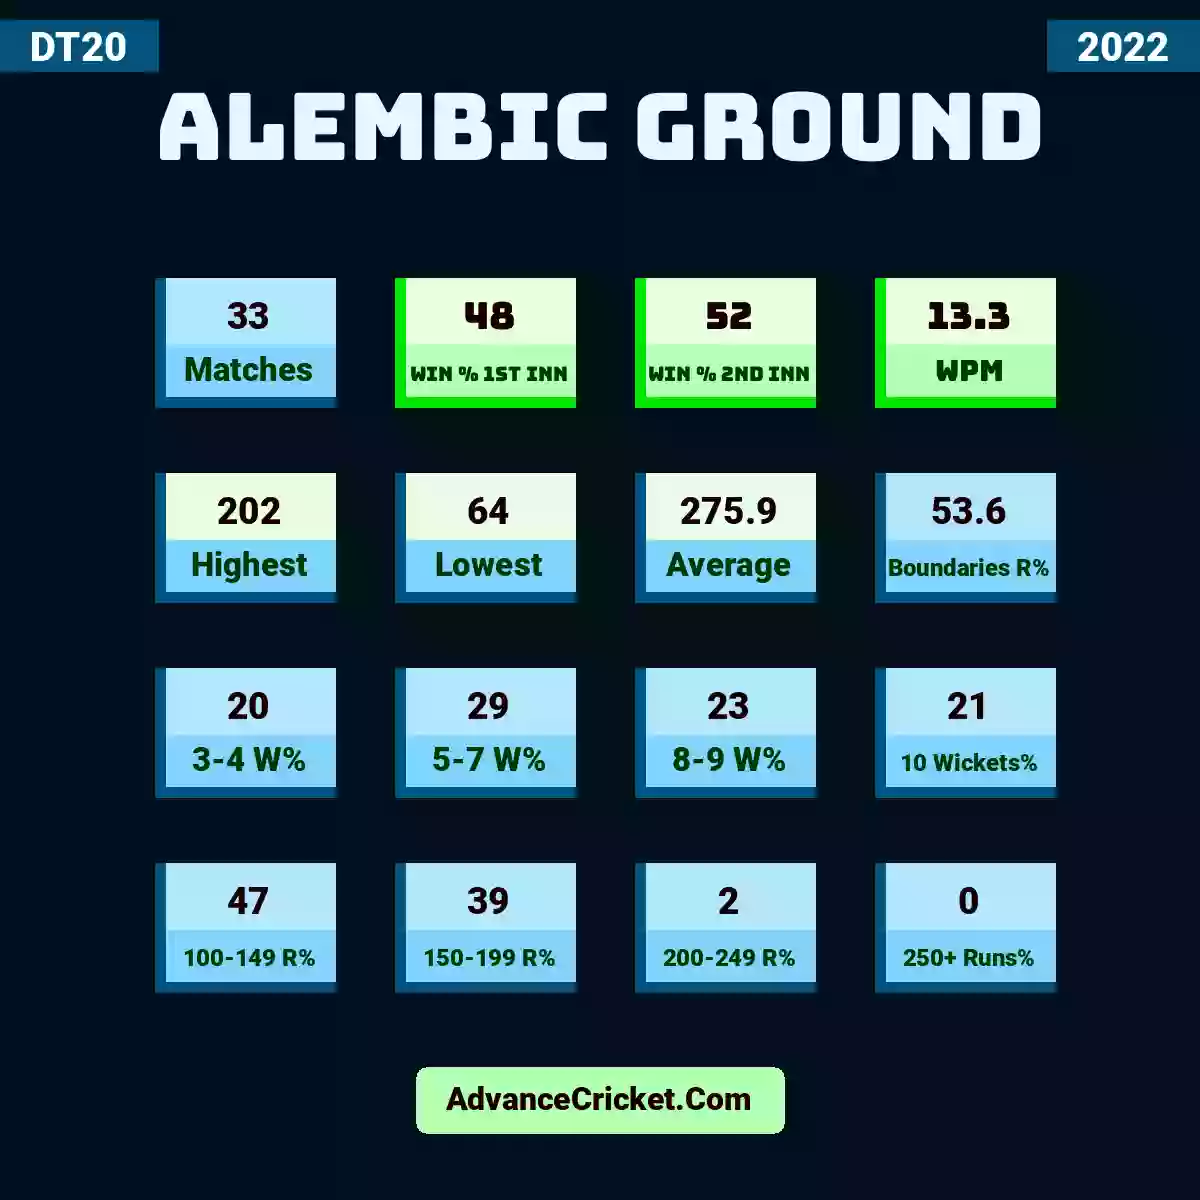 Image showing Alembic Ground with Matches: 33, Win % 1st Inn: 48, Win % 2nd Inn: 52, WPM: 13.3, Highest: 202, Lowest: 64, Average: 275.9, Boundaries R%: 53.6, 3-4 W%: 20, 5-7 W%: 29, 8-9 W%: 23, 10 Wickets%: 21, 100-149 R%: 47, 150-199 R%: 39, 200-249 R%: 2, 250+ Runs%: 0.